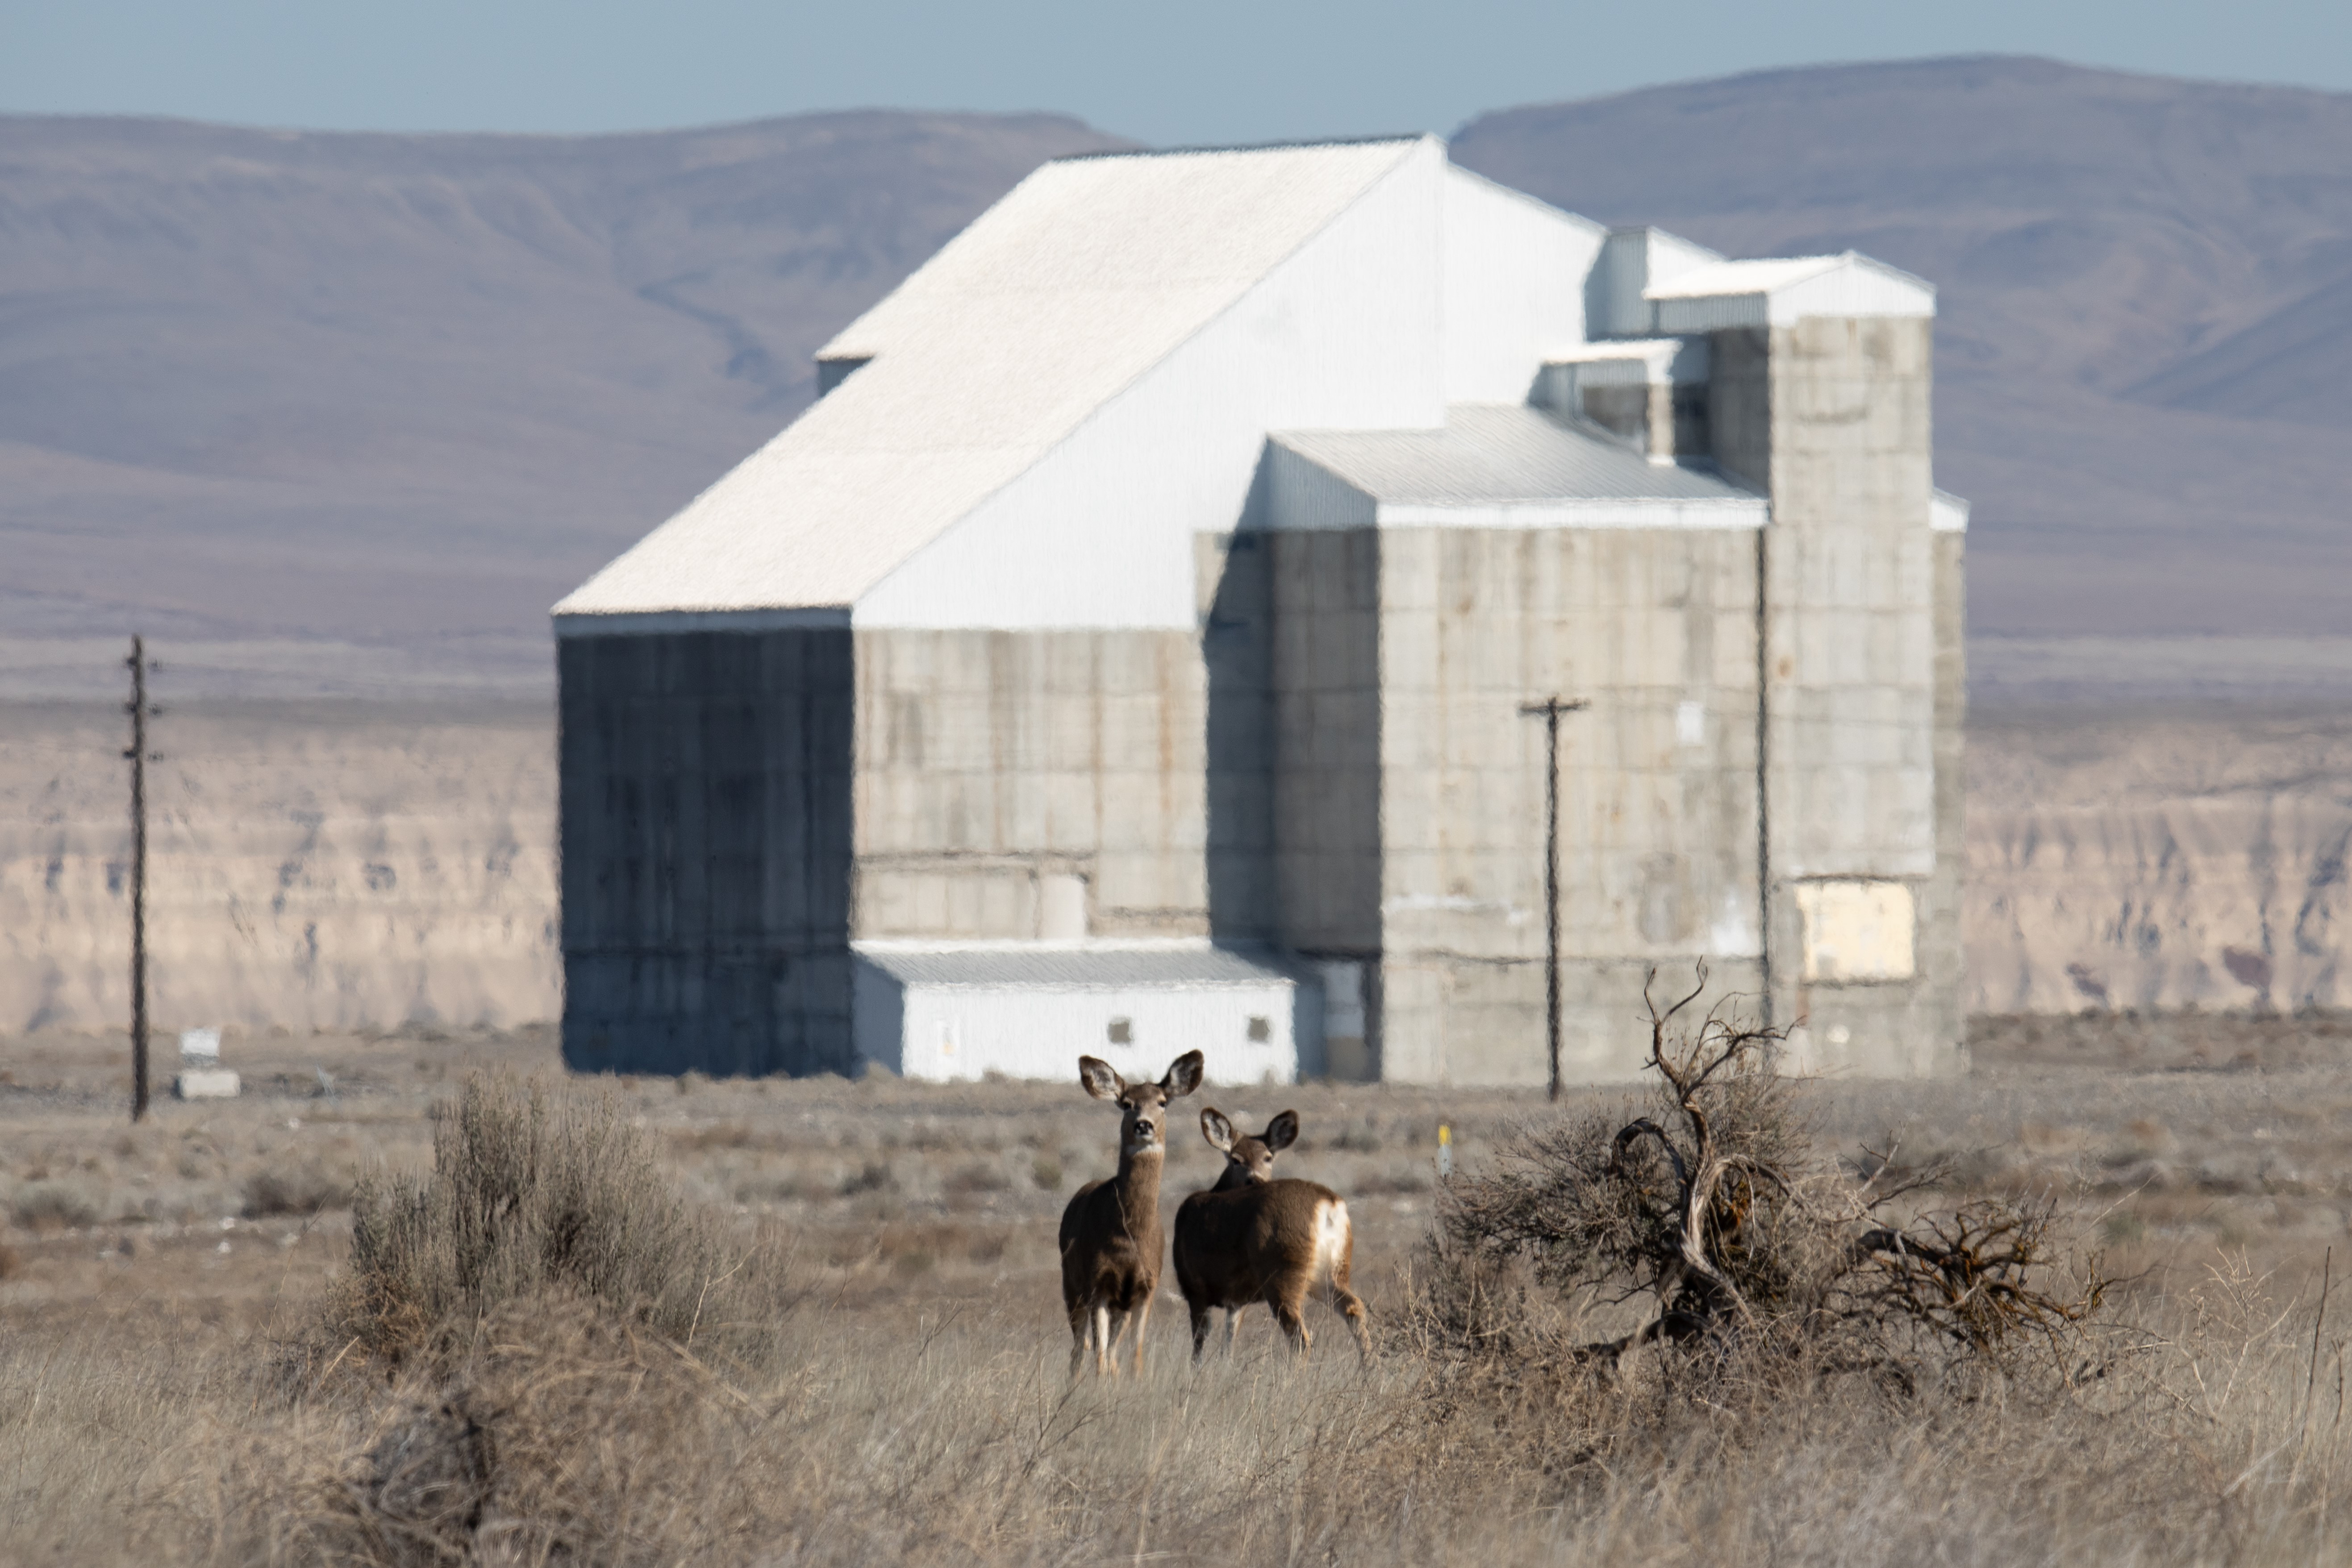 Two deer stand in a field of Eastern Washington desert grass, giant concrete nuclear reactor in background